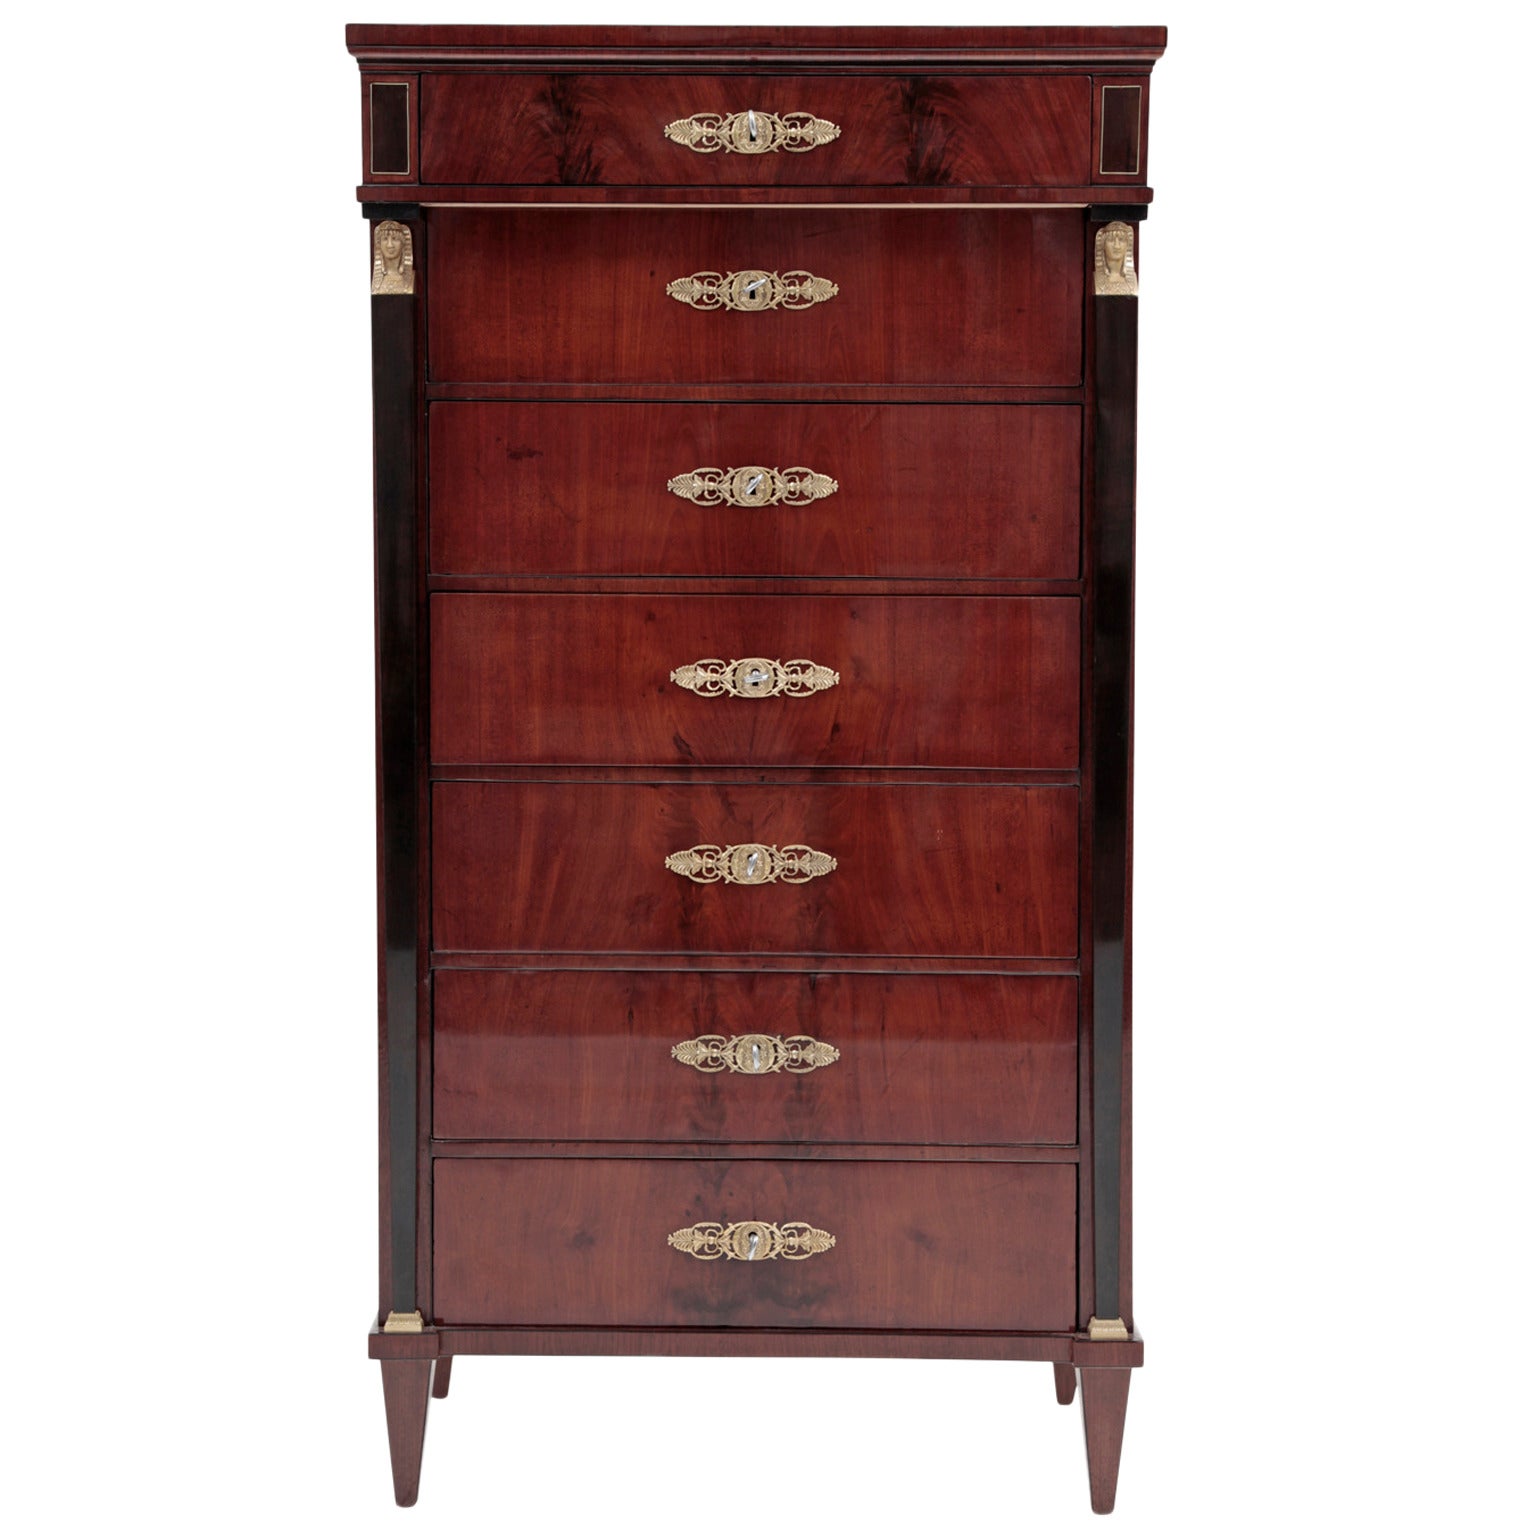 Vienna Empire Chest of Drawers or Semainaire from the 1810s